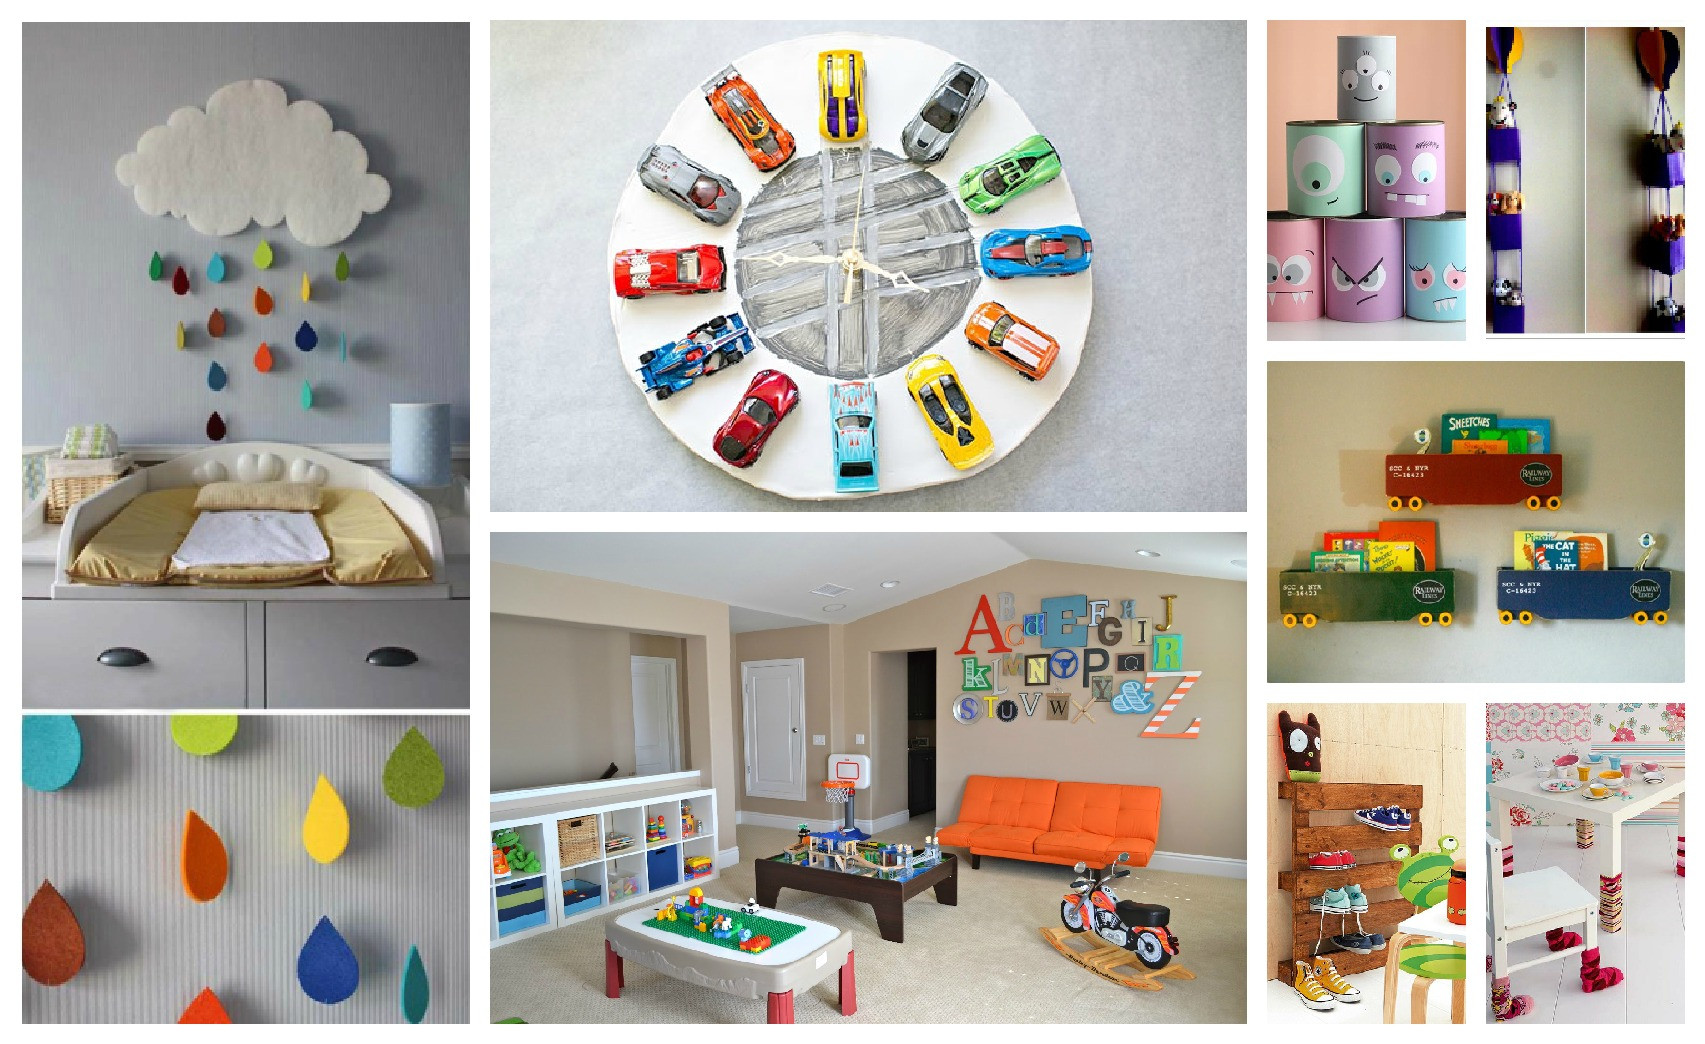 DIY Toddler Room Decor
 Cheerful Kids Room Decorations That You Will Fall In Love